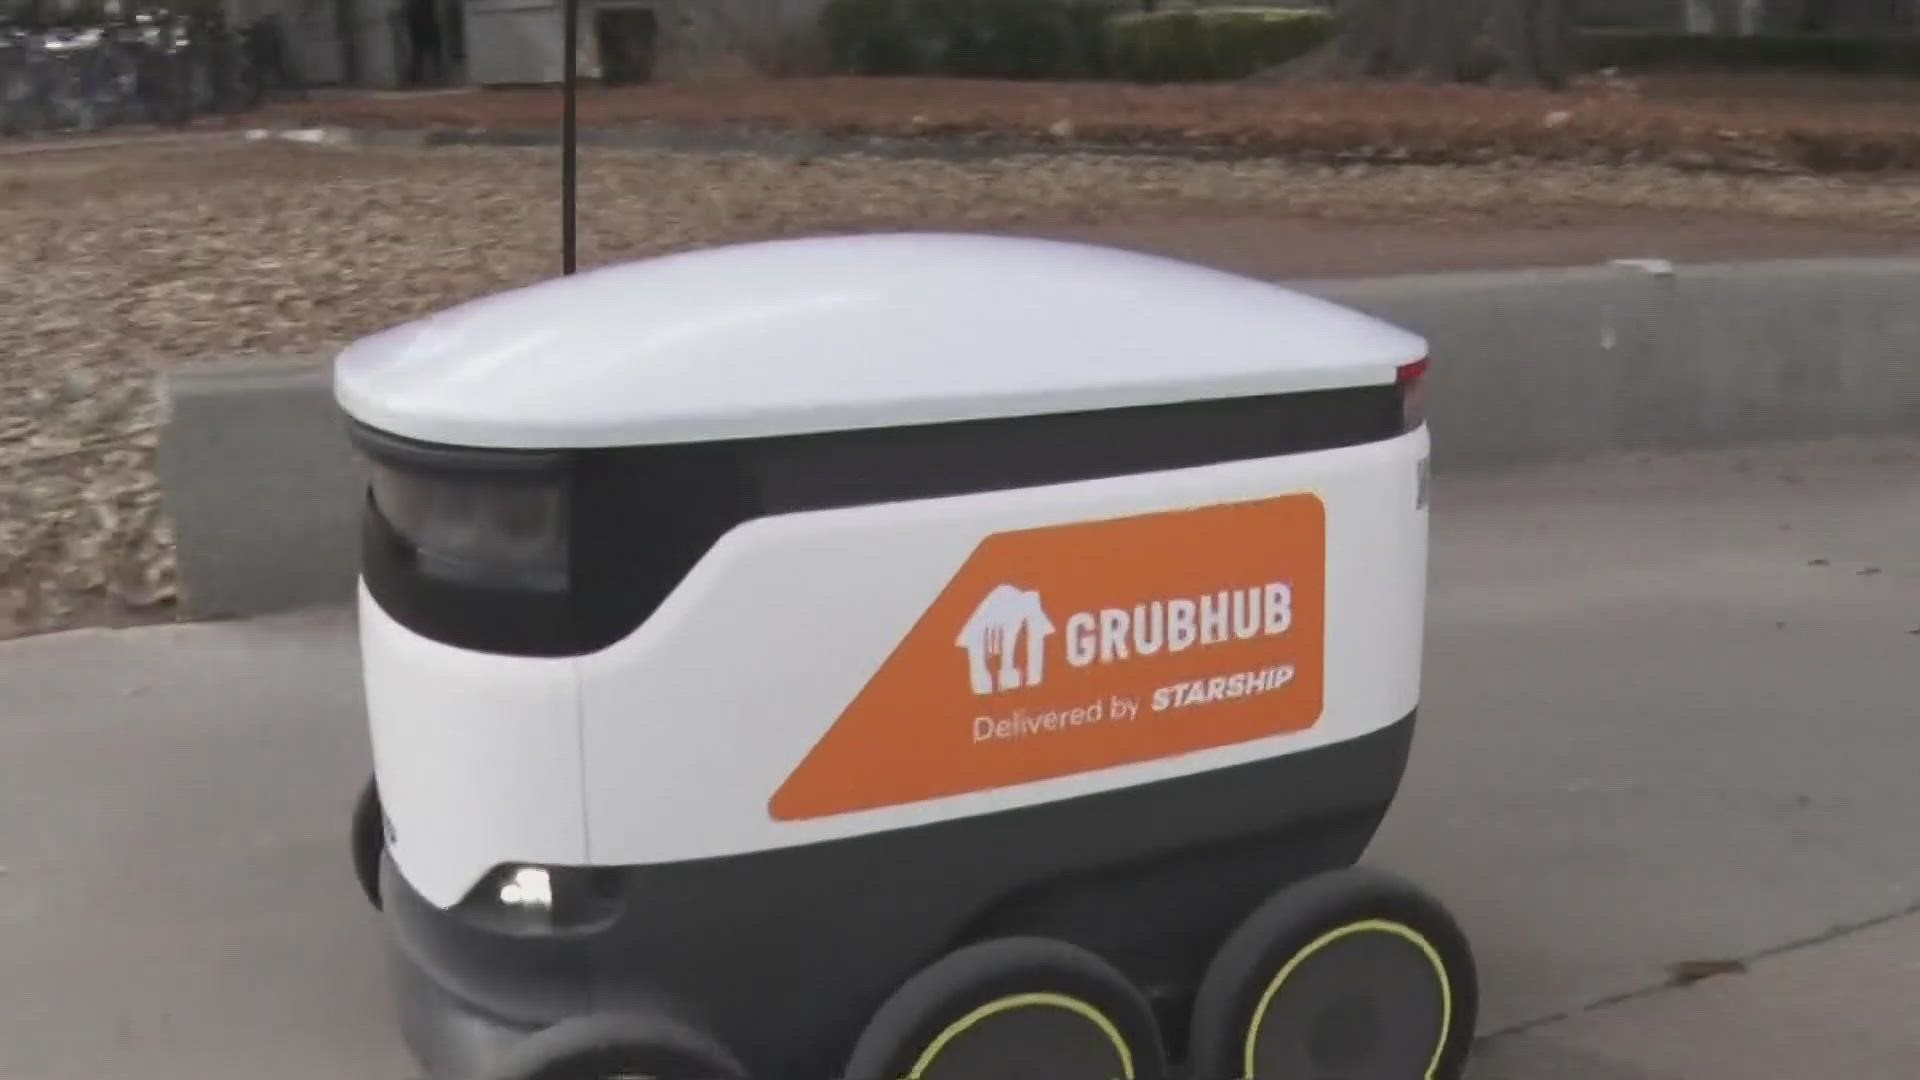 20 different food delivery robots can be found roaming the streets of Baylor. Students and faculty can use the Grubhub app to order food from seven restaurants.